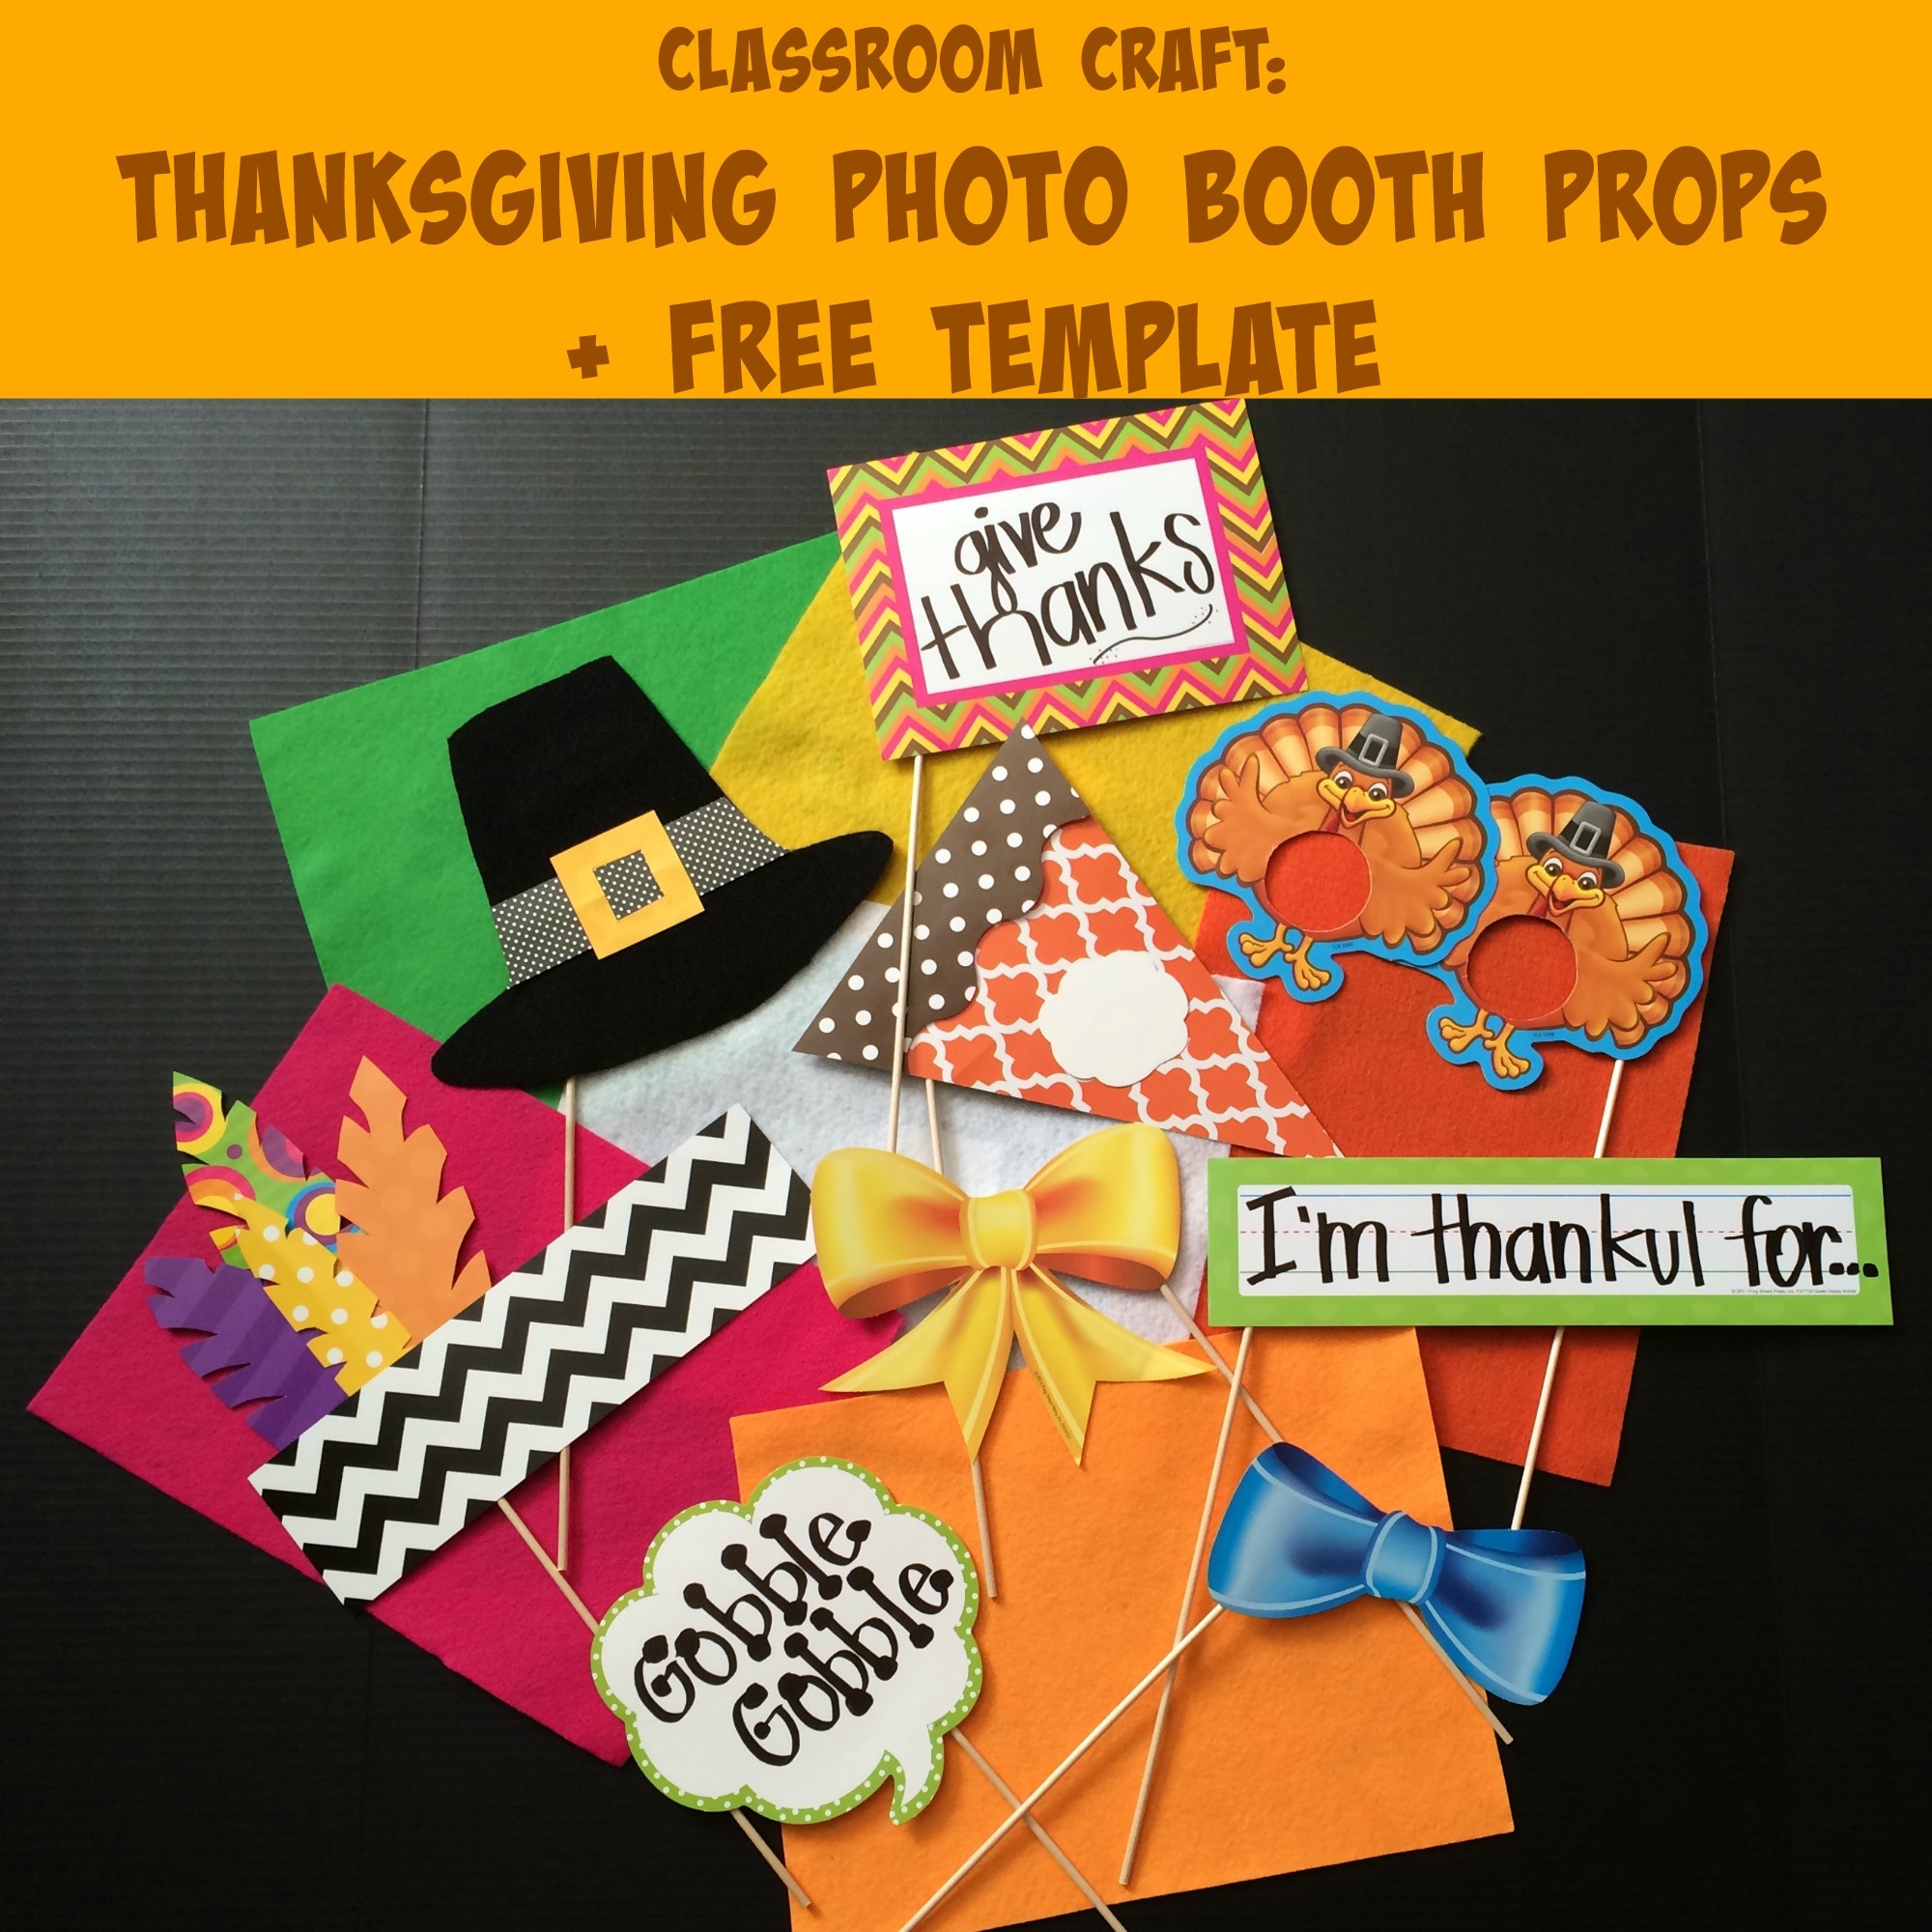 Thanksgiving Photo Booth Props For The Classroom &amp;amp; Free Template - Free Printable Thanksgiving Photo Props